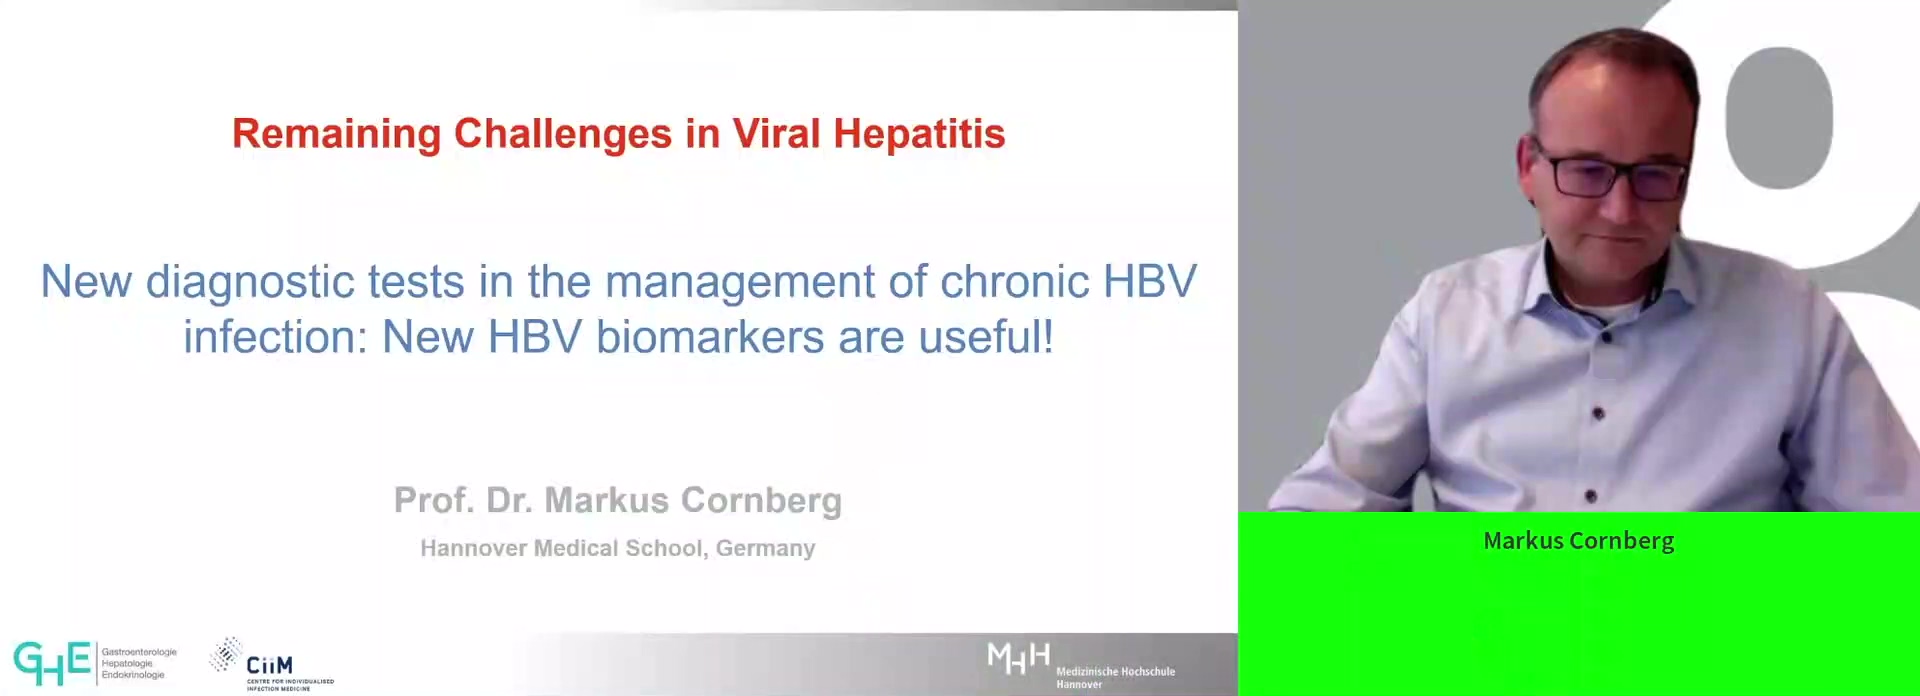 New diagnostic tests in the management of chronic HBV infection: New HBV biomarkers are useful!